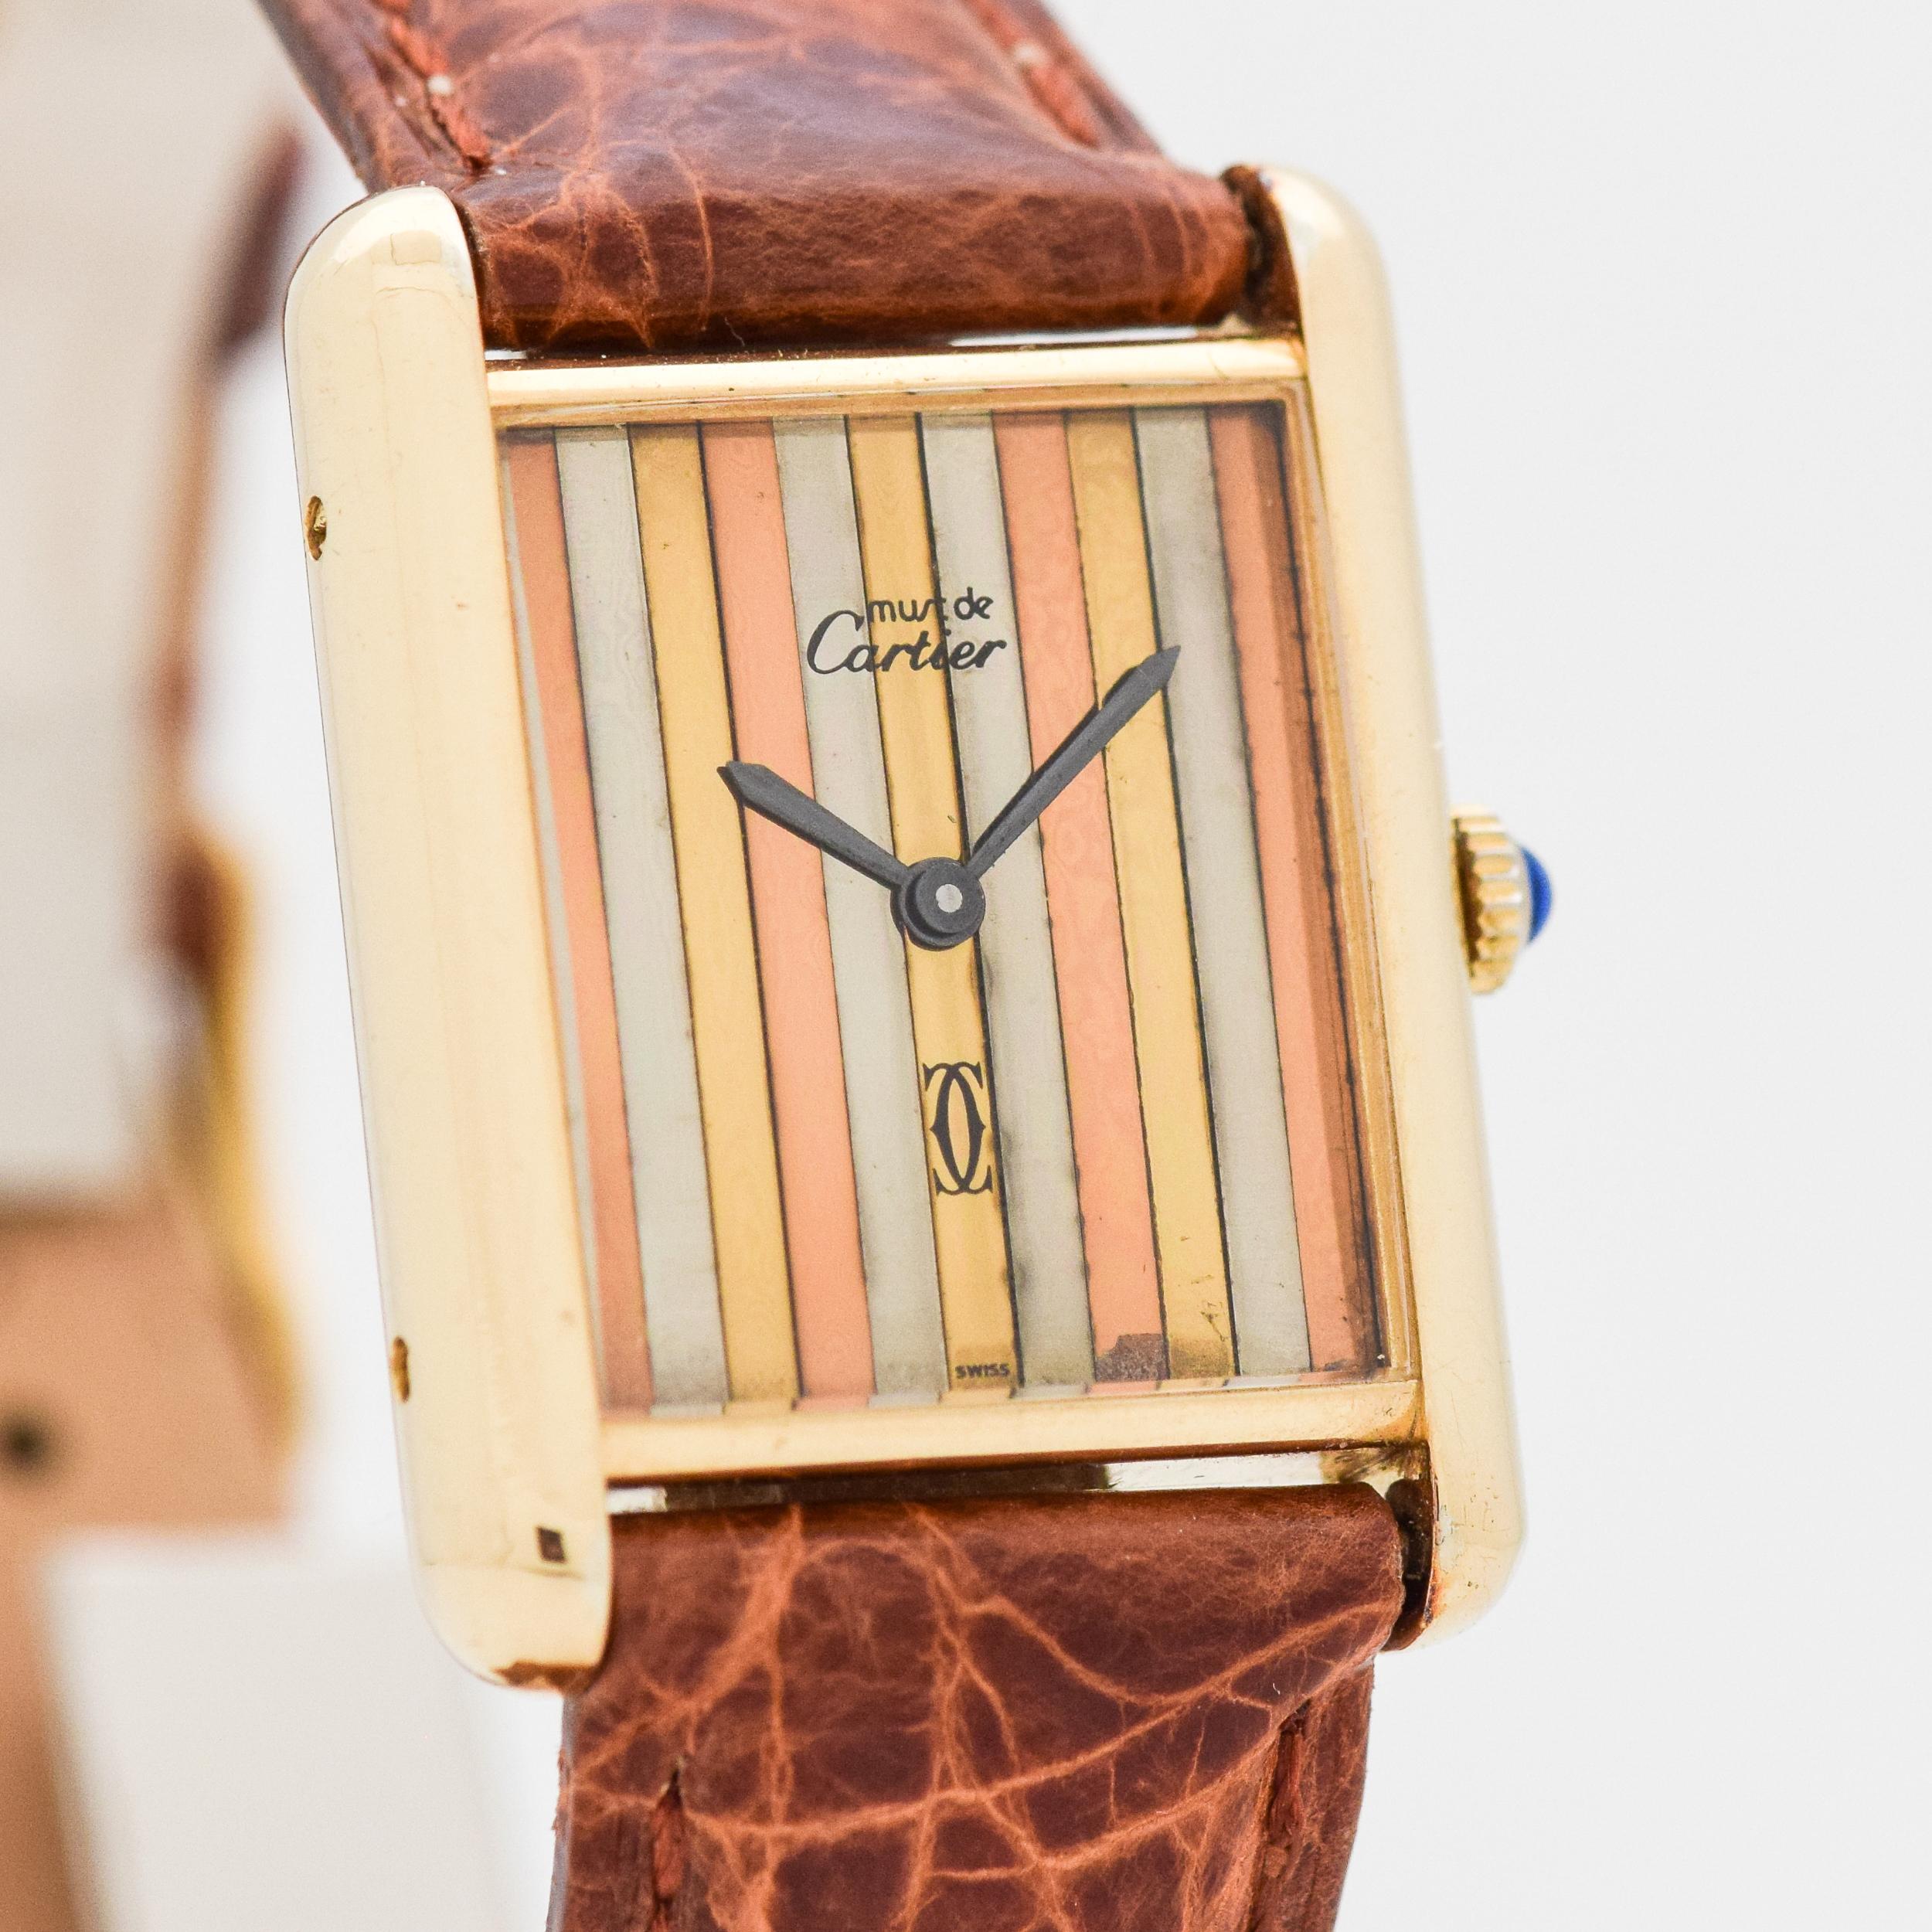 1990's Vintage Cartier Standard Men's Size Must de Cartier Tank 18k Yellow Gold Plated Over Sterling Silver watch wit Original Tri-Color (Rose, Yellow, Silver) Dial. Triple Singed. 23mm x 27mm lug to lug (0.91 in. x 1.06 in.) - 17 jewel, manual